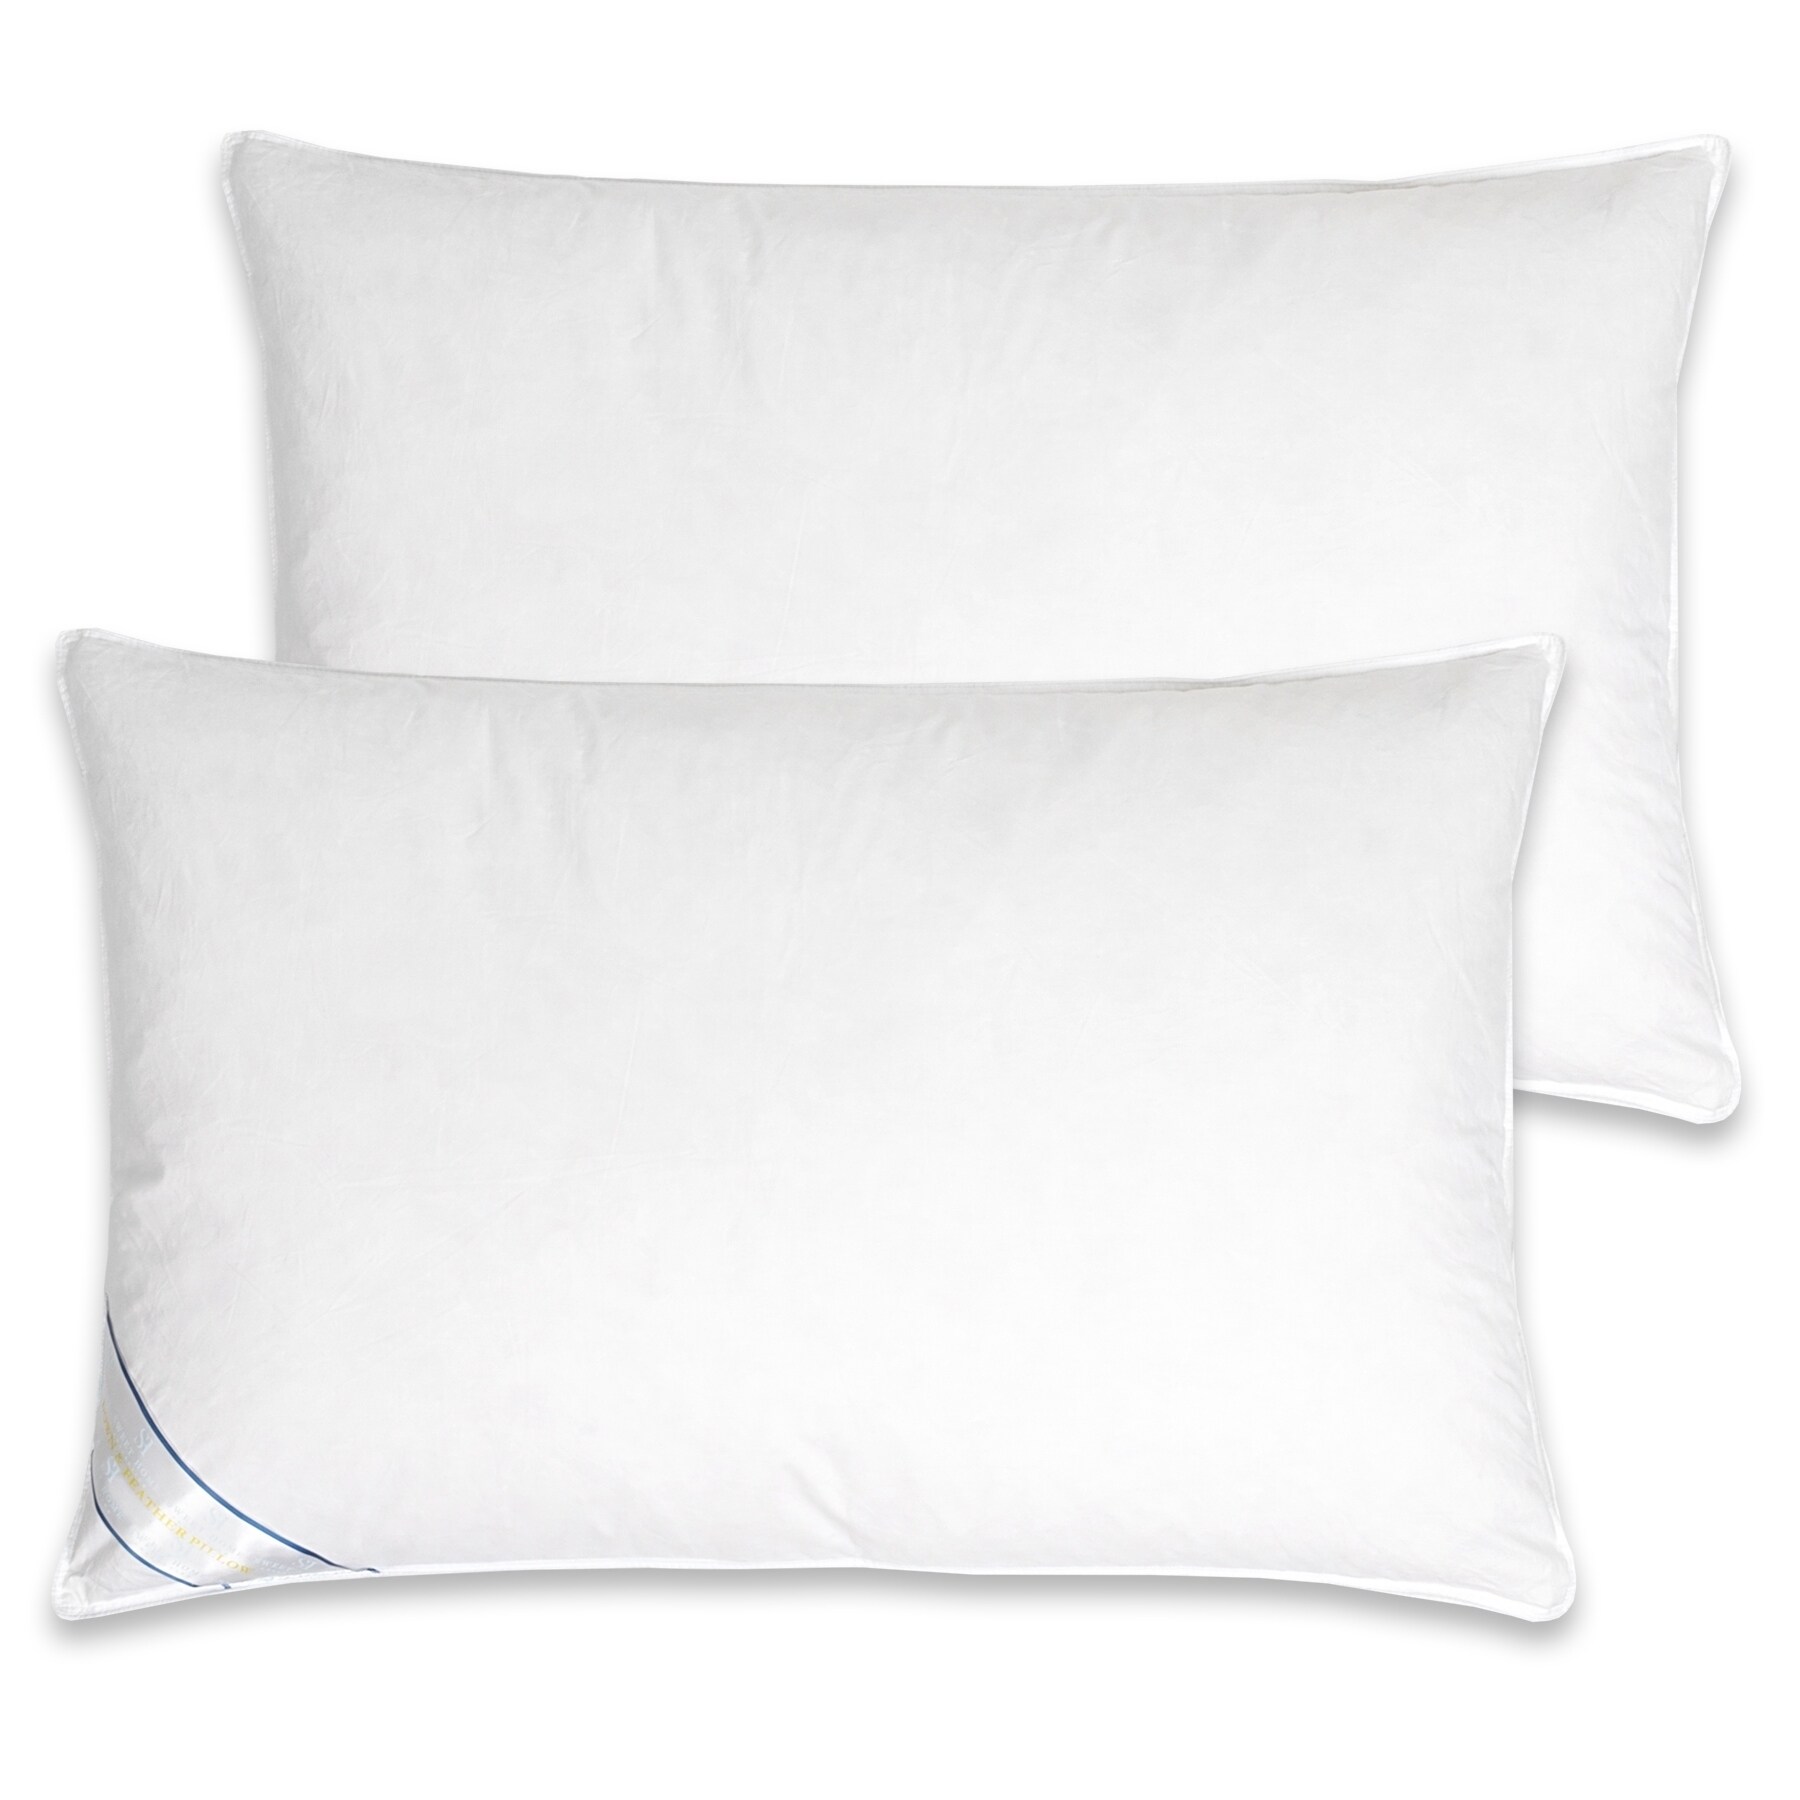 https://ak1.ostkcdn.com/images/products/10620041/Sweet-Home-Collection-Luxury-Natural-Feather-Bed-Pillows-Set-of-2-White-e15975c4-86d3-45ae-a001-612a0f326580.jpg